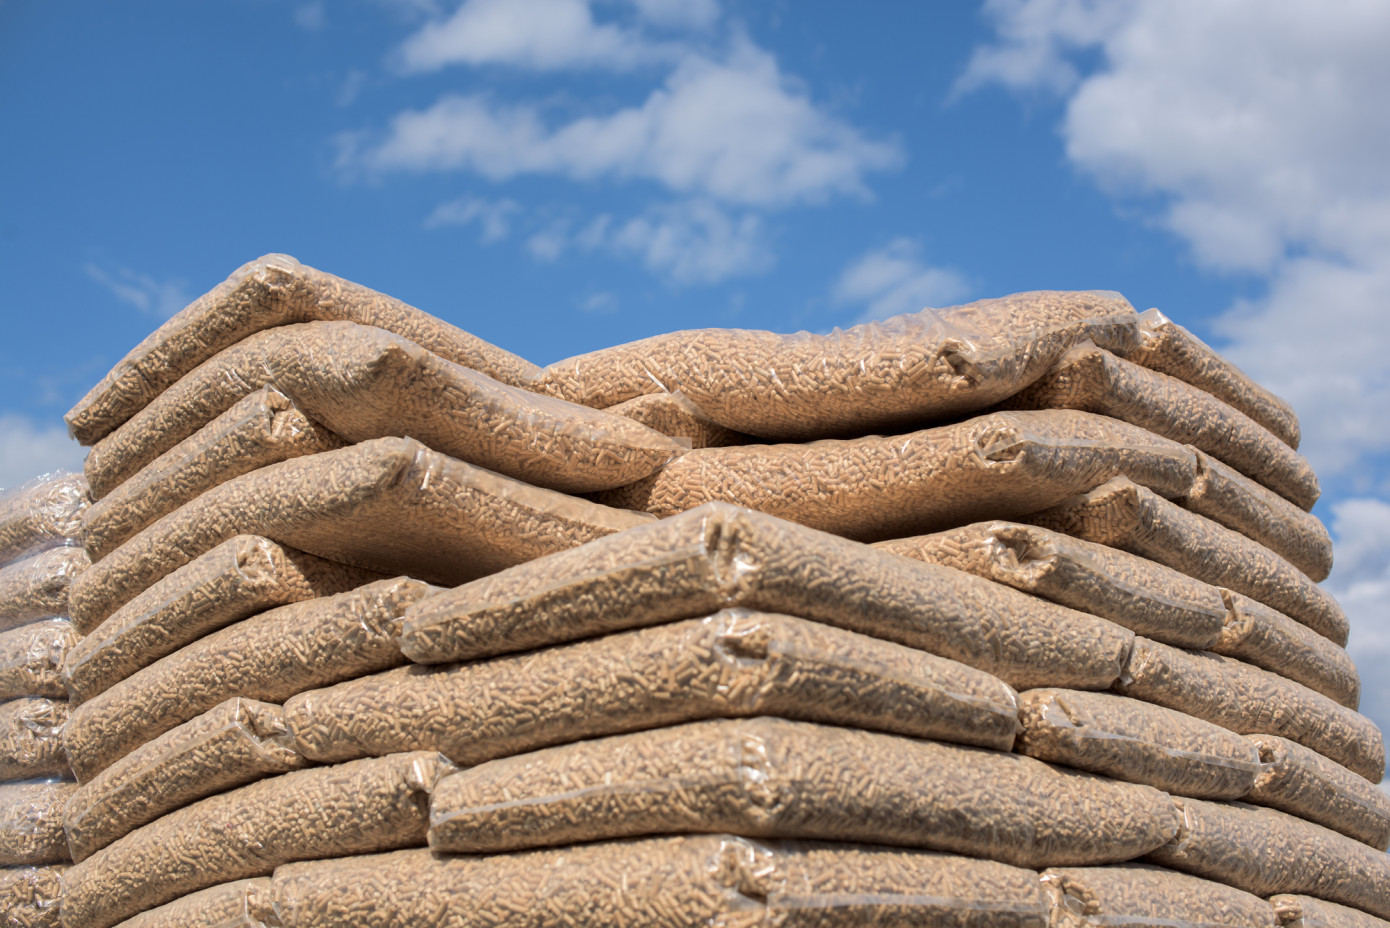 Rising demand from Netherlands and Japan drives nearly 30% increase in value of U.S. wood pellet exports in Q1 2023